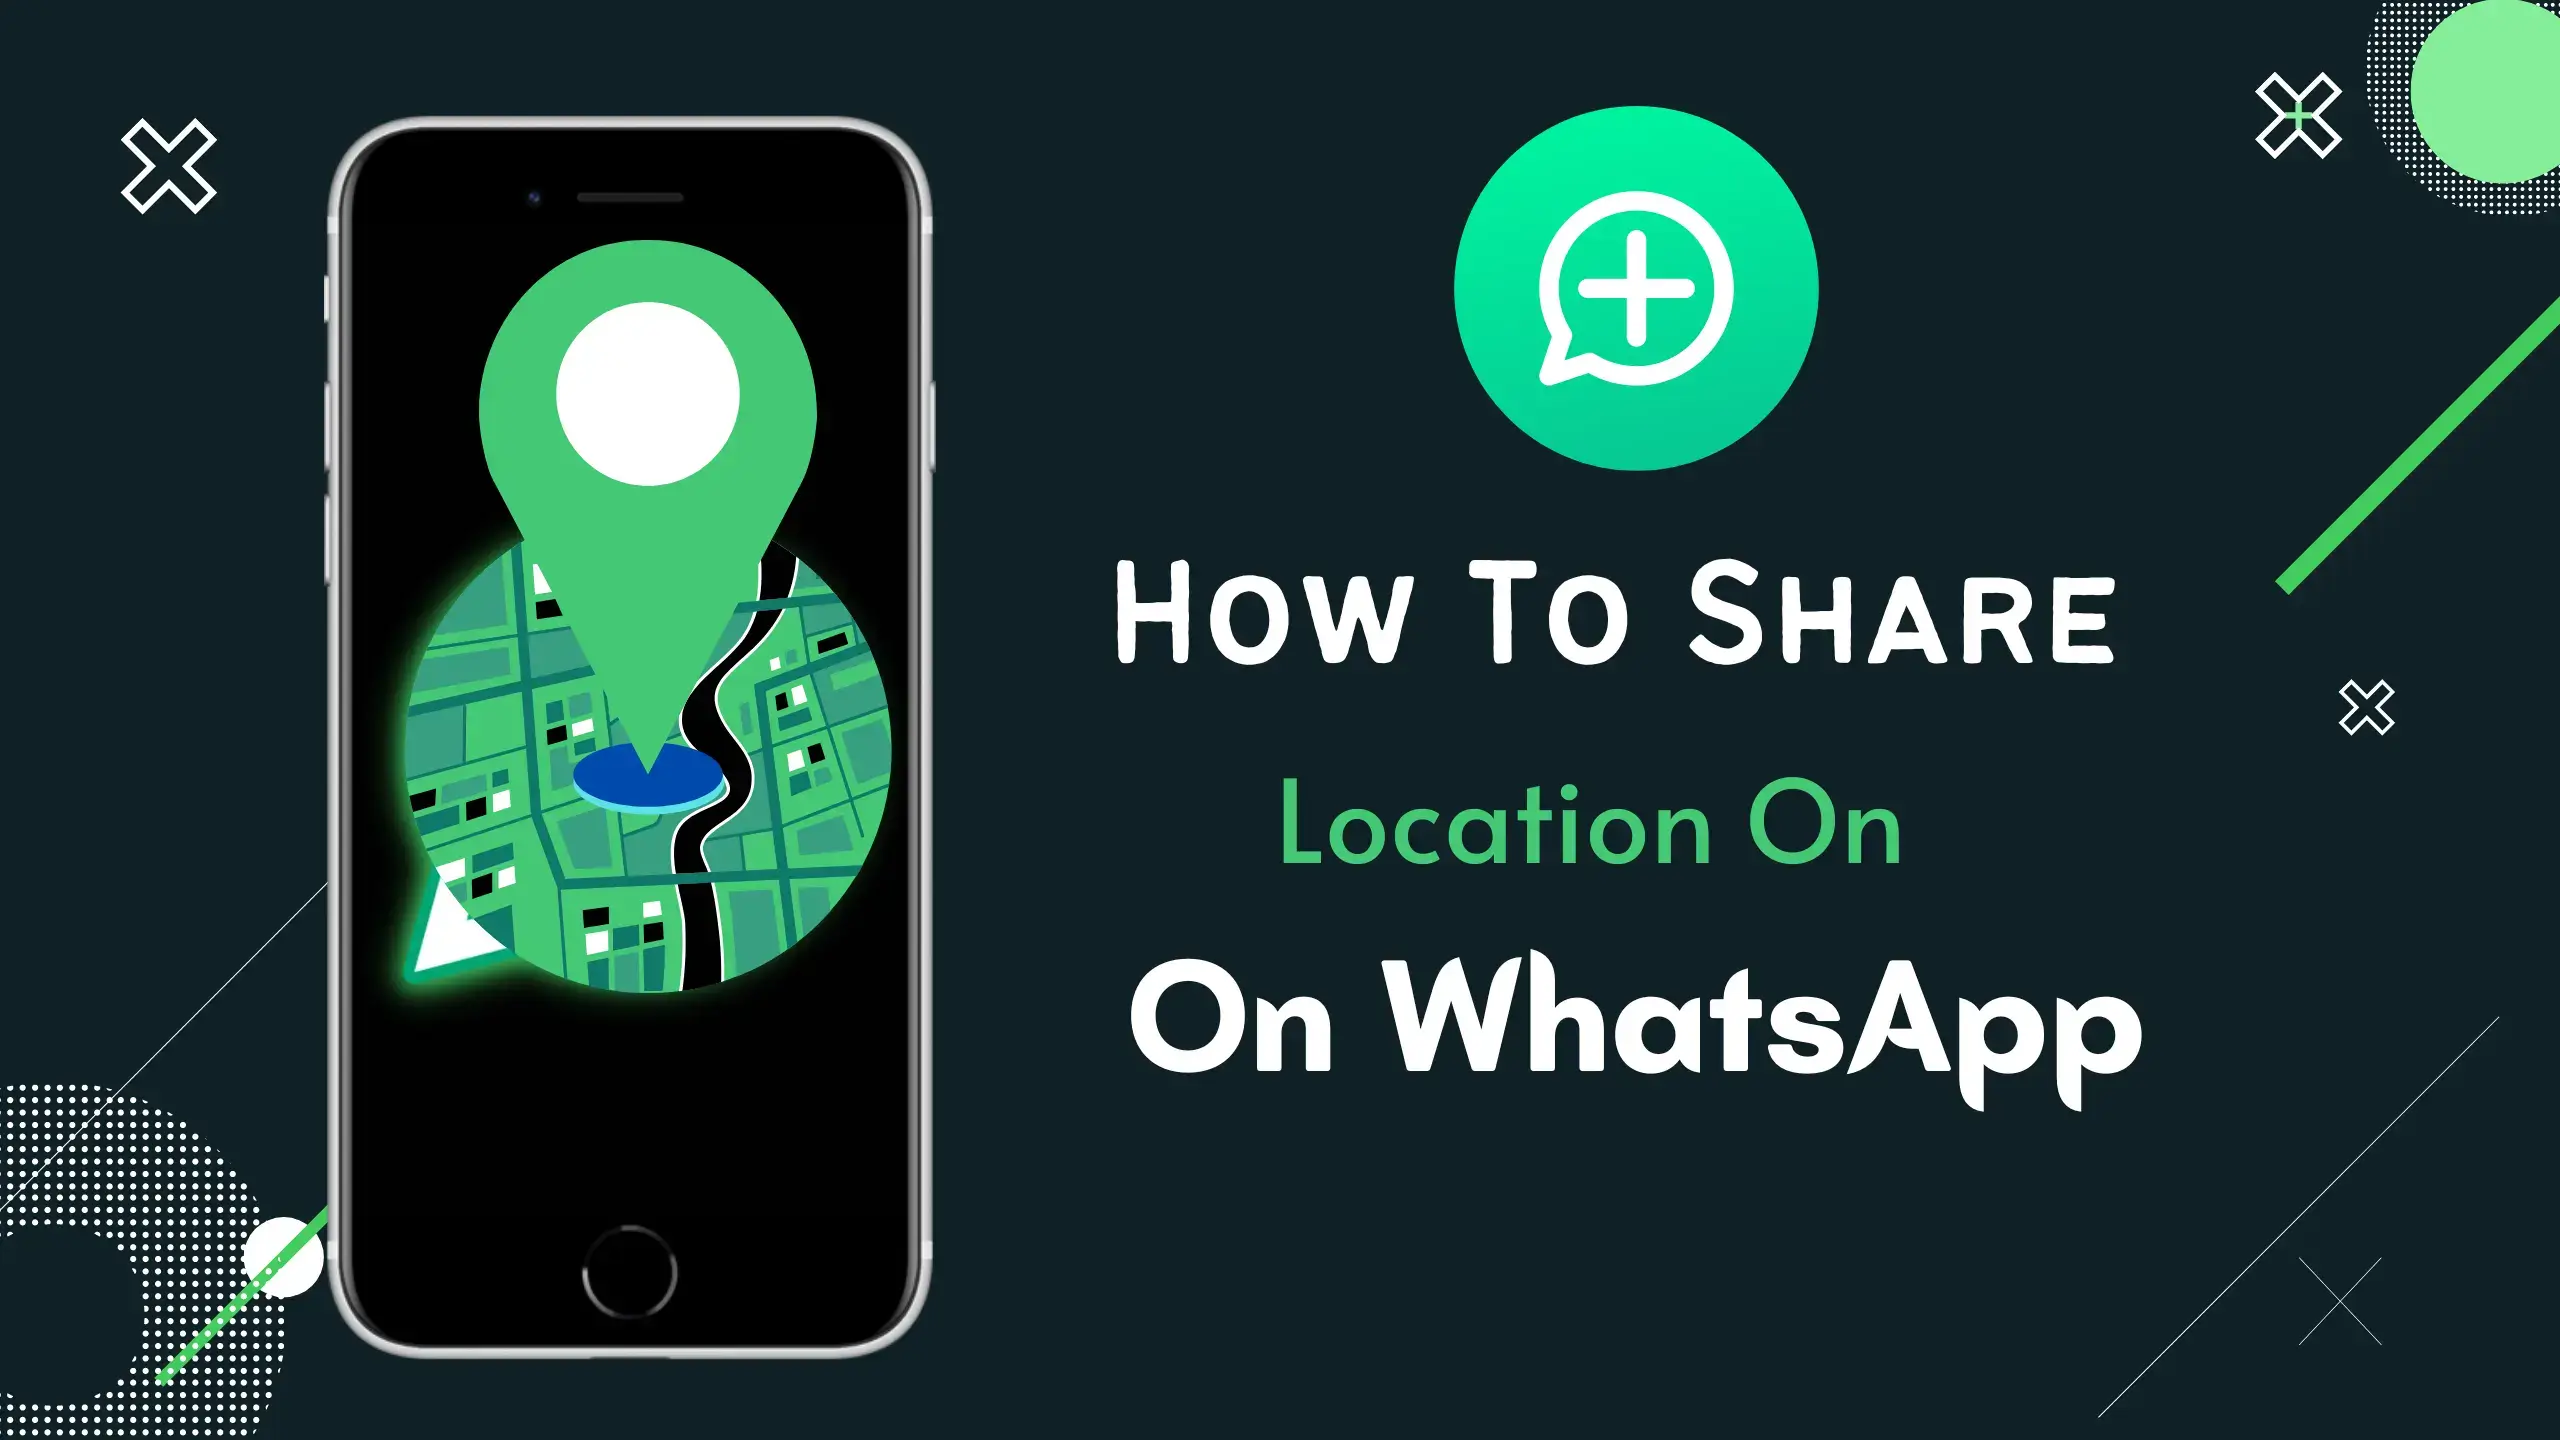 How To Share Location On WhatsApp Easily